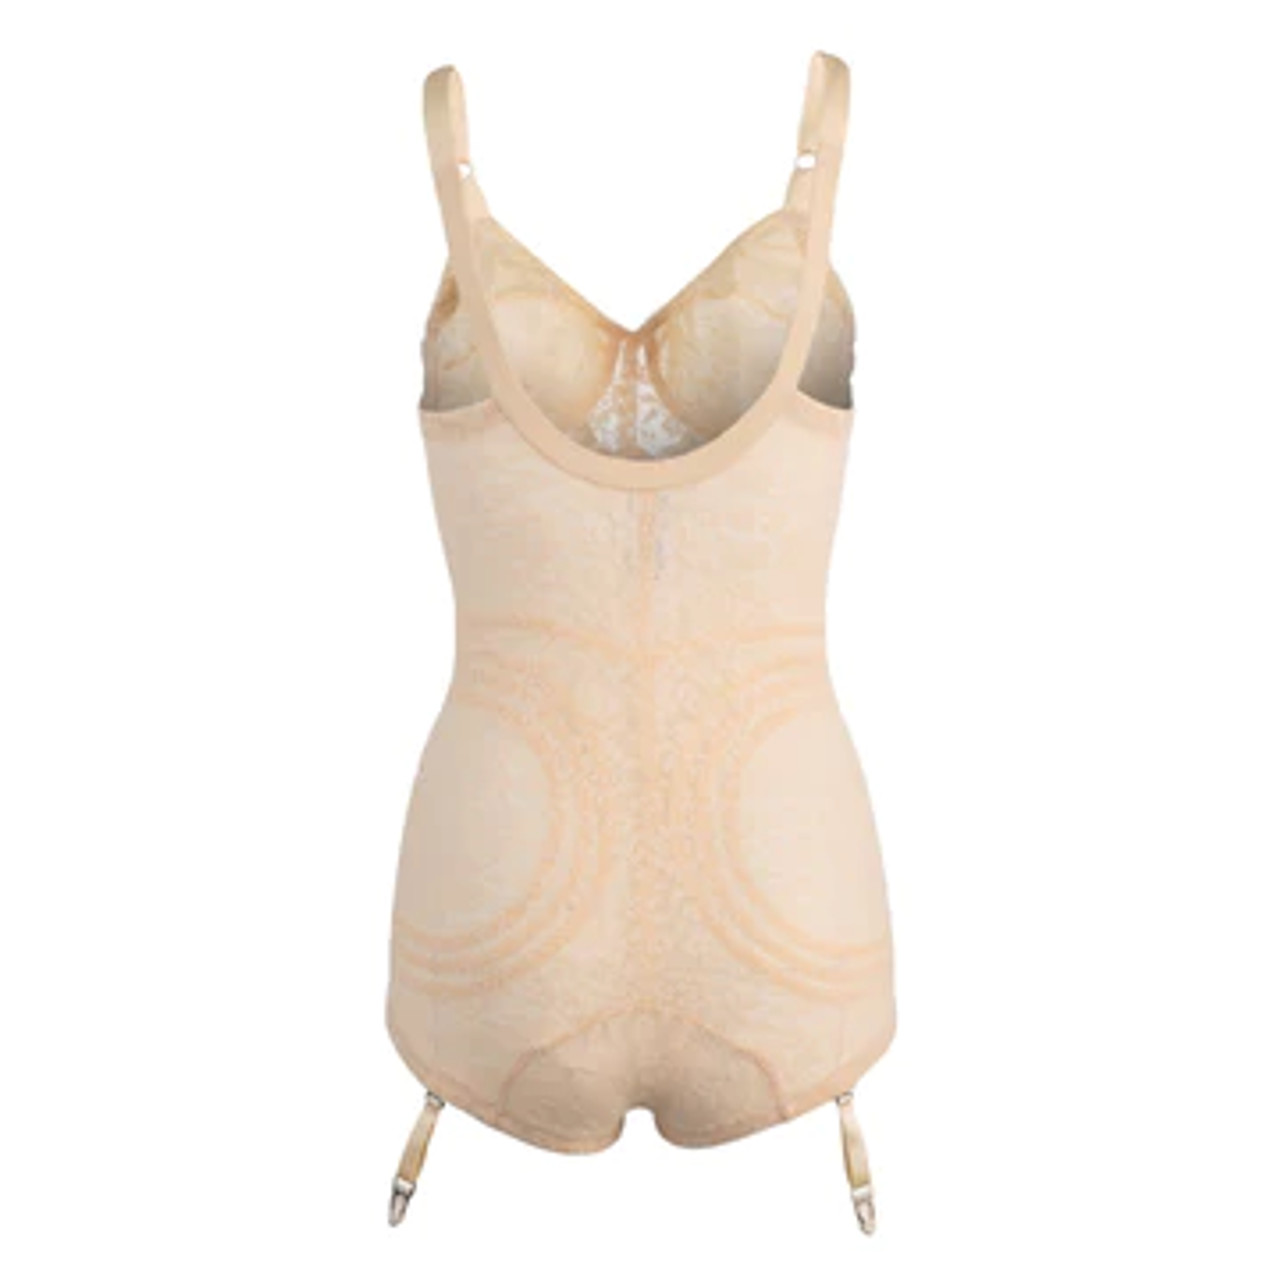 Extra Firm Body Briefer from Rago - Natural Curves